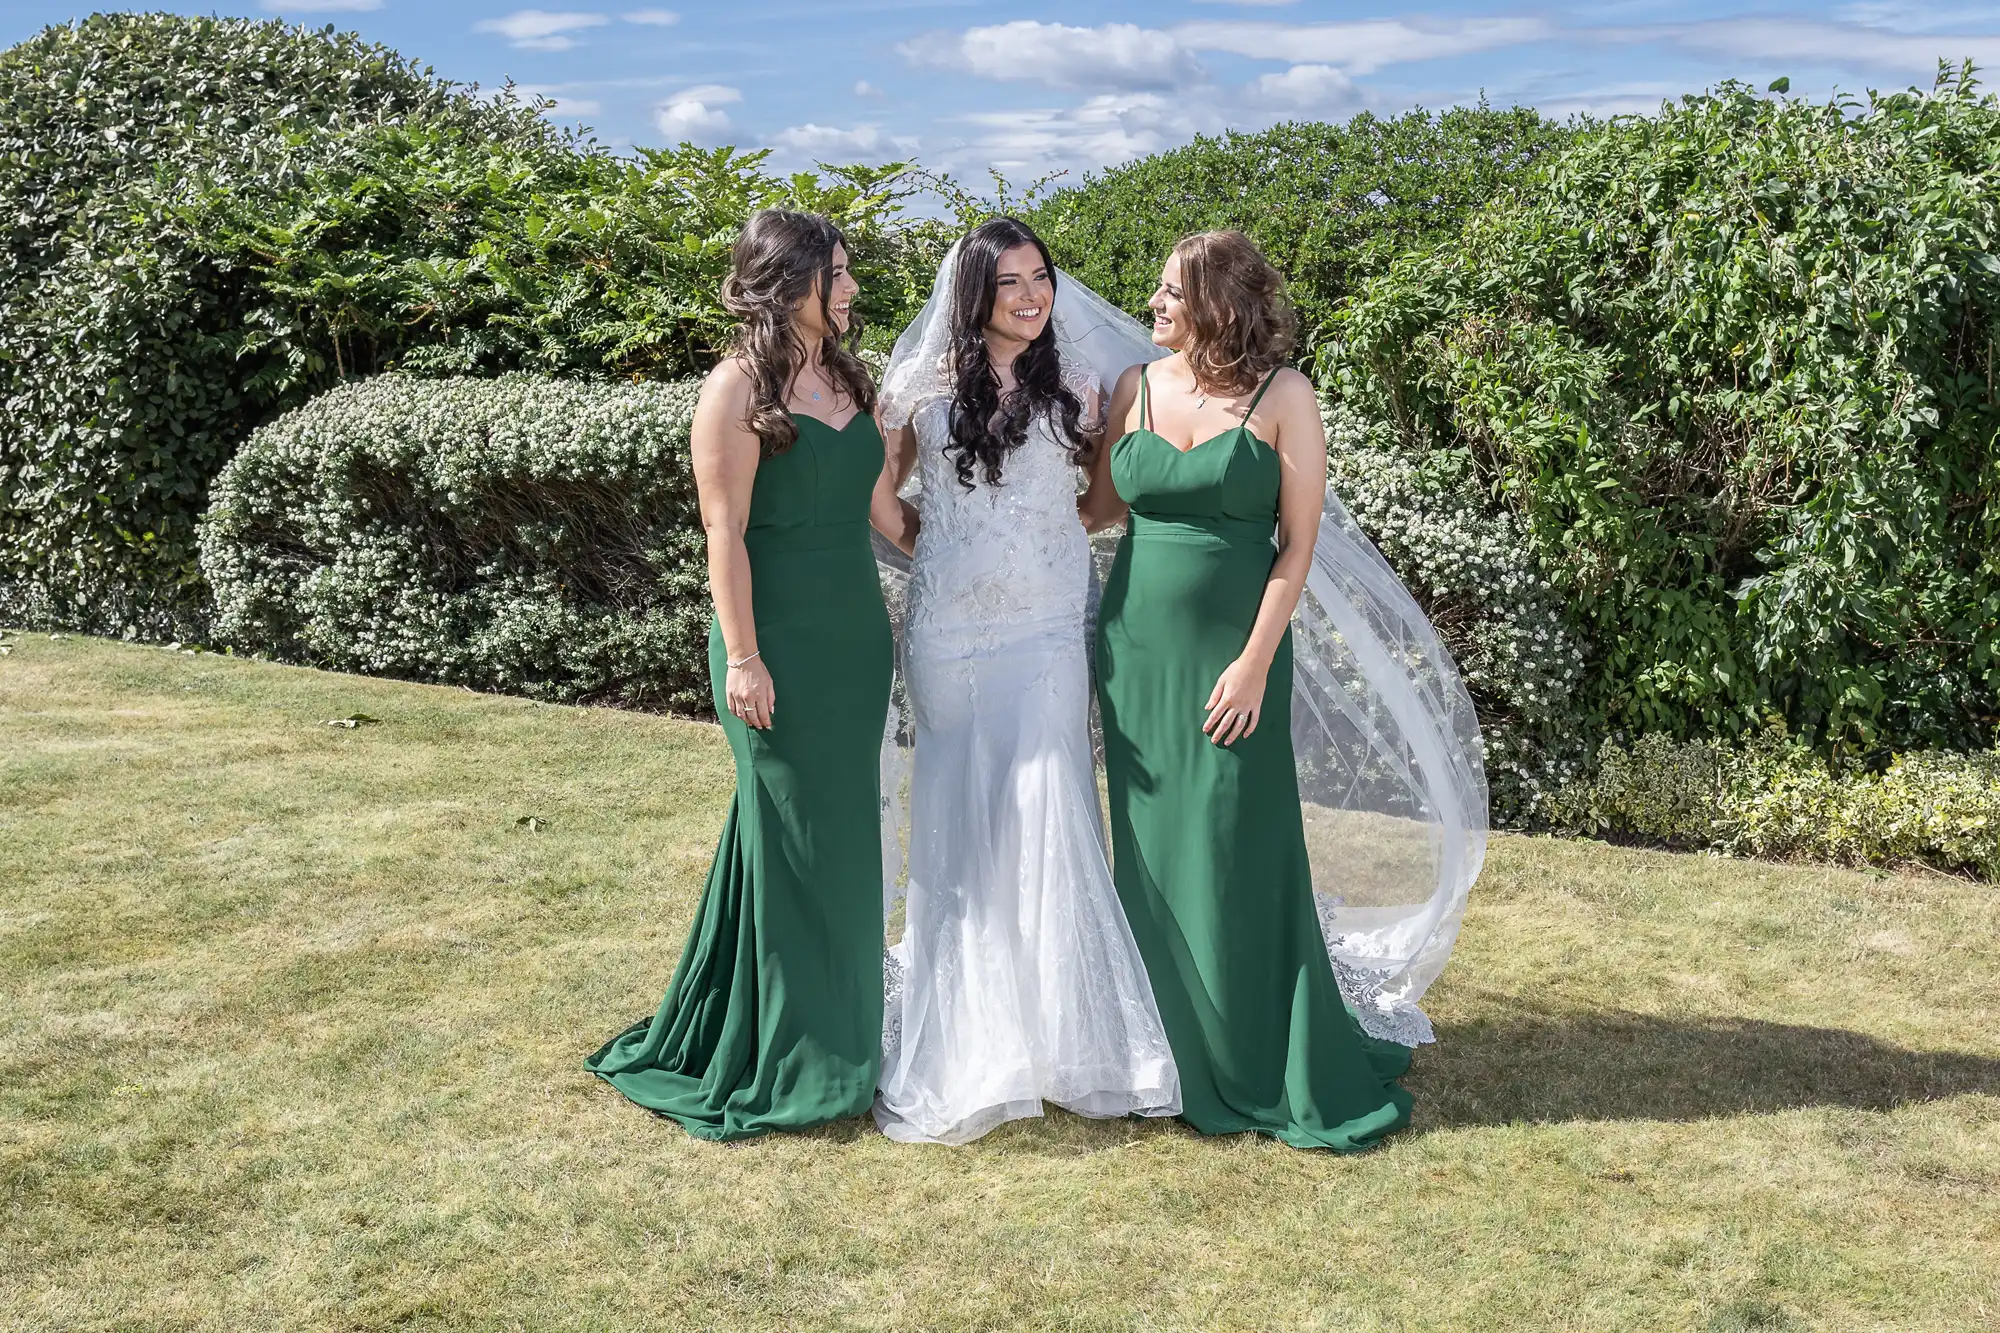 Three women dressed in formal attire, with the bride in white and two bridesmaids in green, standing and smiling on a lawn with a hedge in the background.